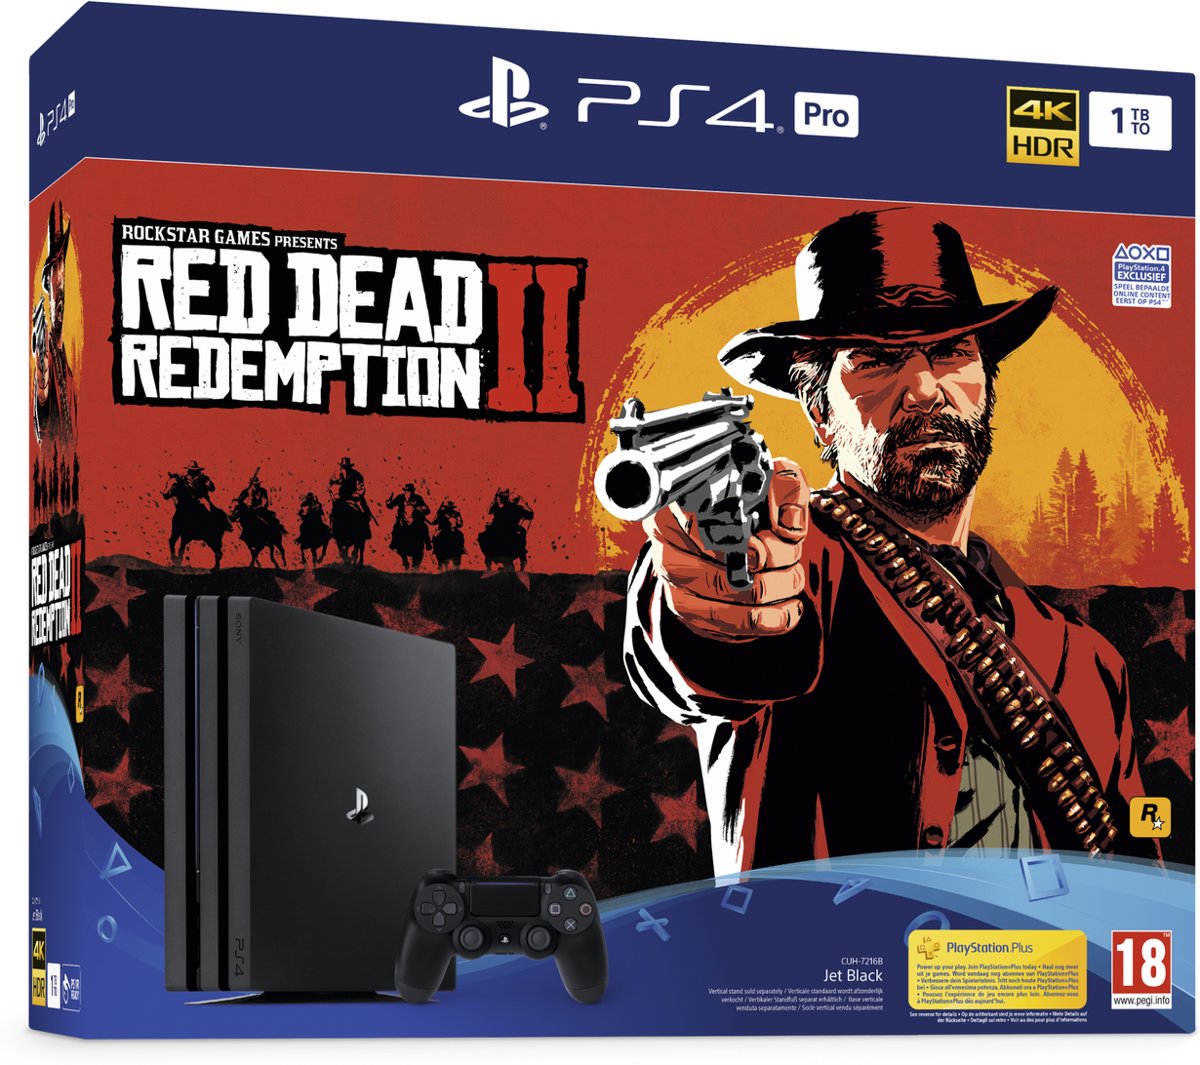 PlayStation 4 Pro (1 TB) + Red Dead Redemption 2 Bundel (PS4), Sony Computer Entertainment